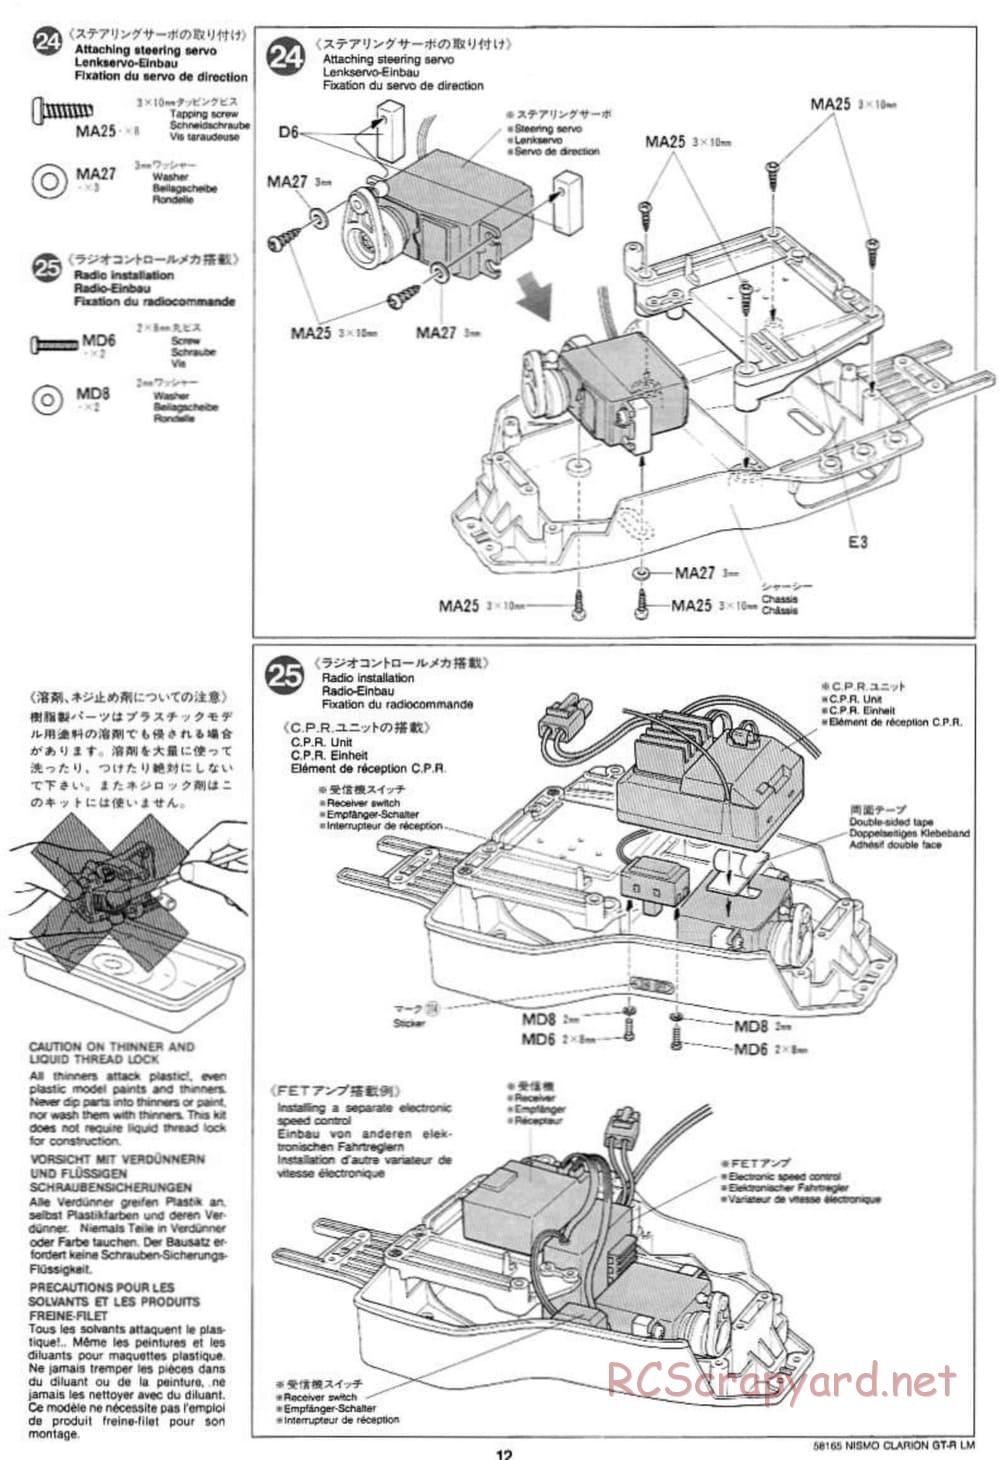 Tamiya - Nismo Clarion GT-R LM - TA-02W Chassis - Manual - Page 12